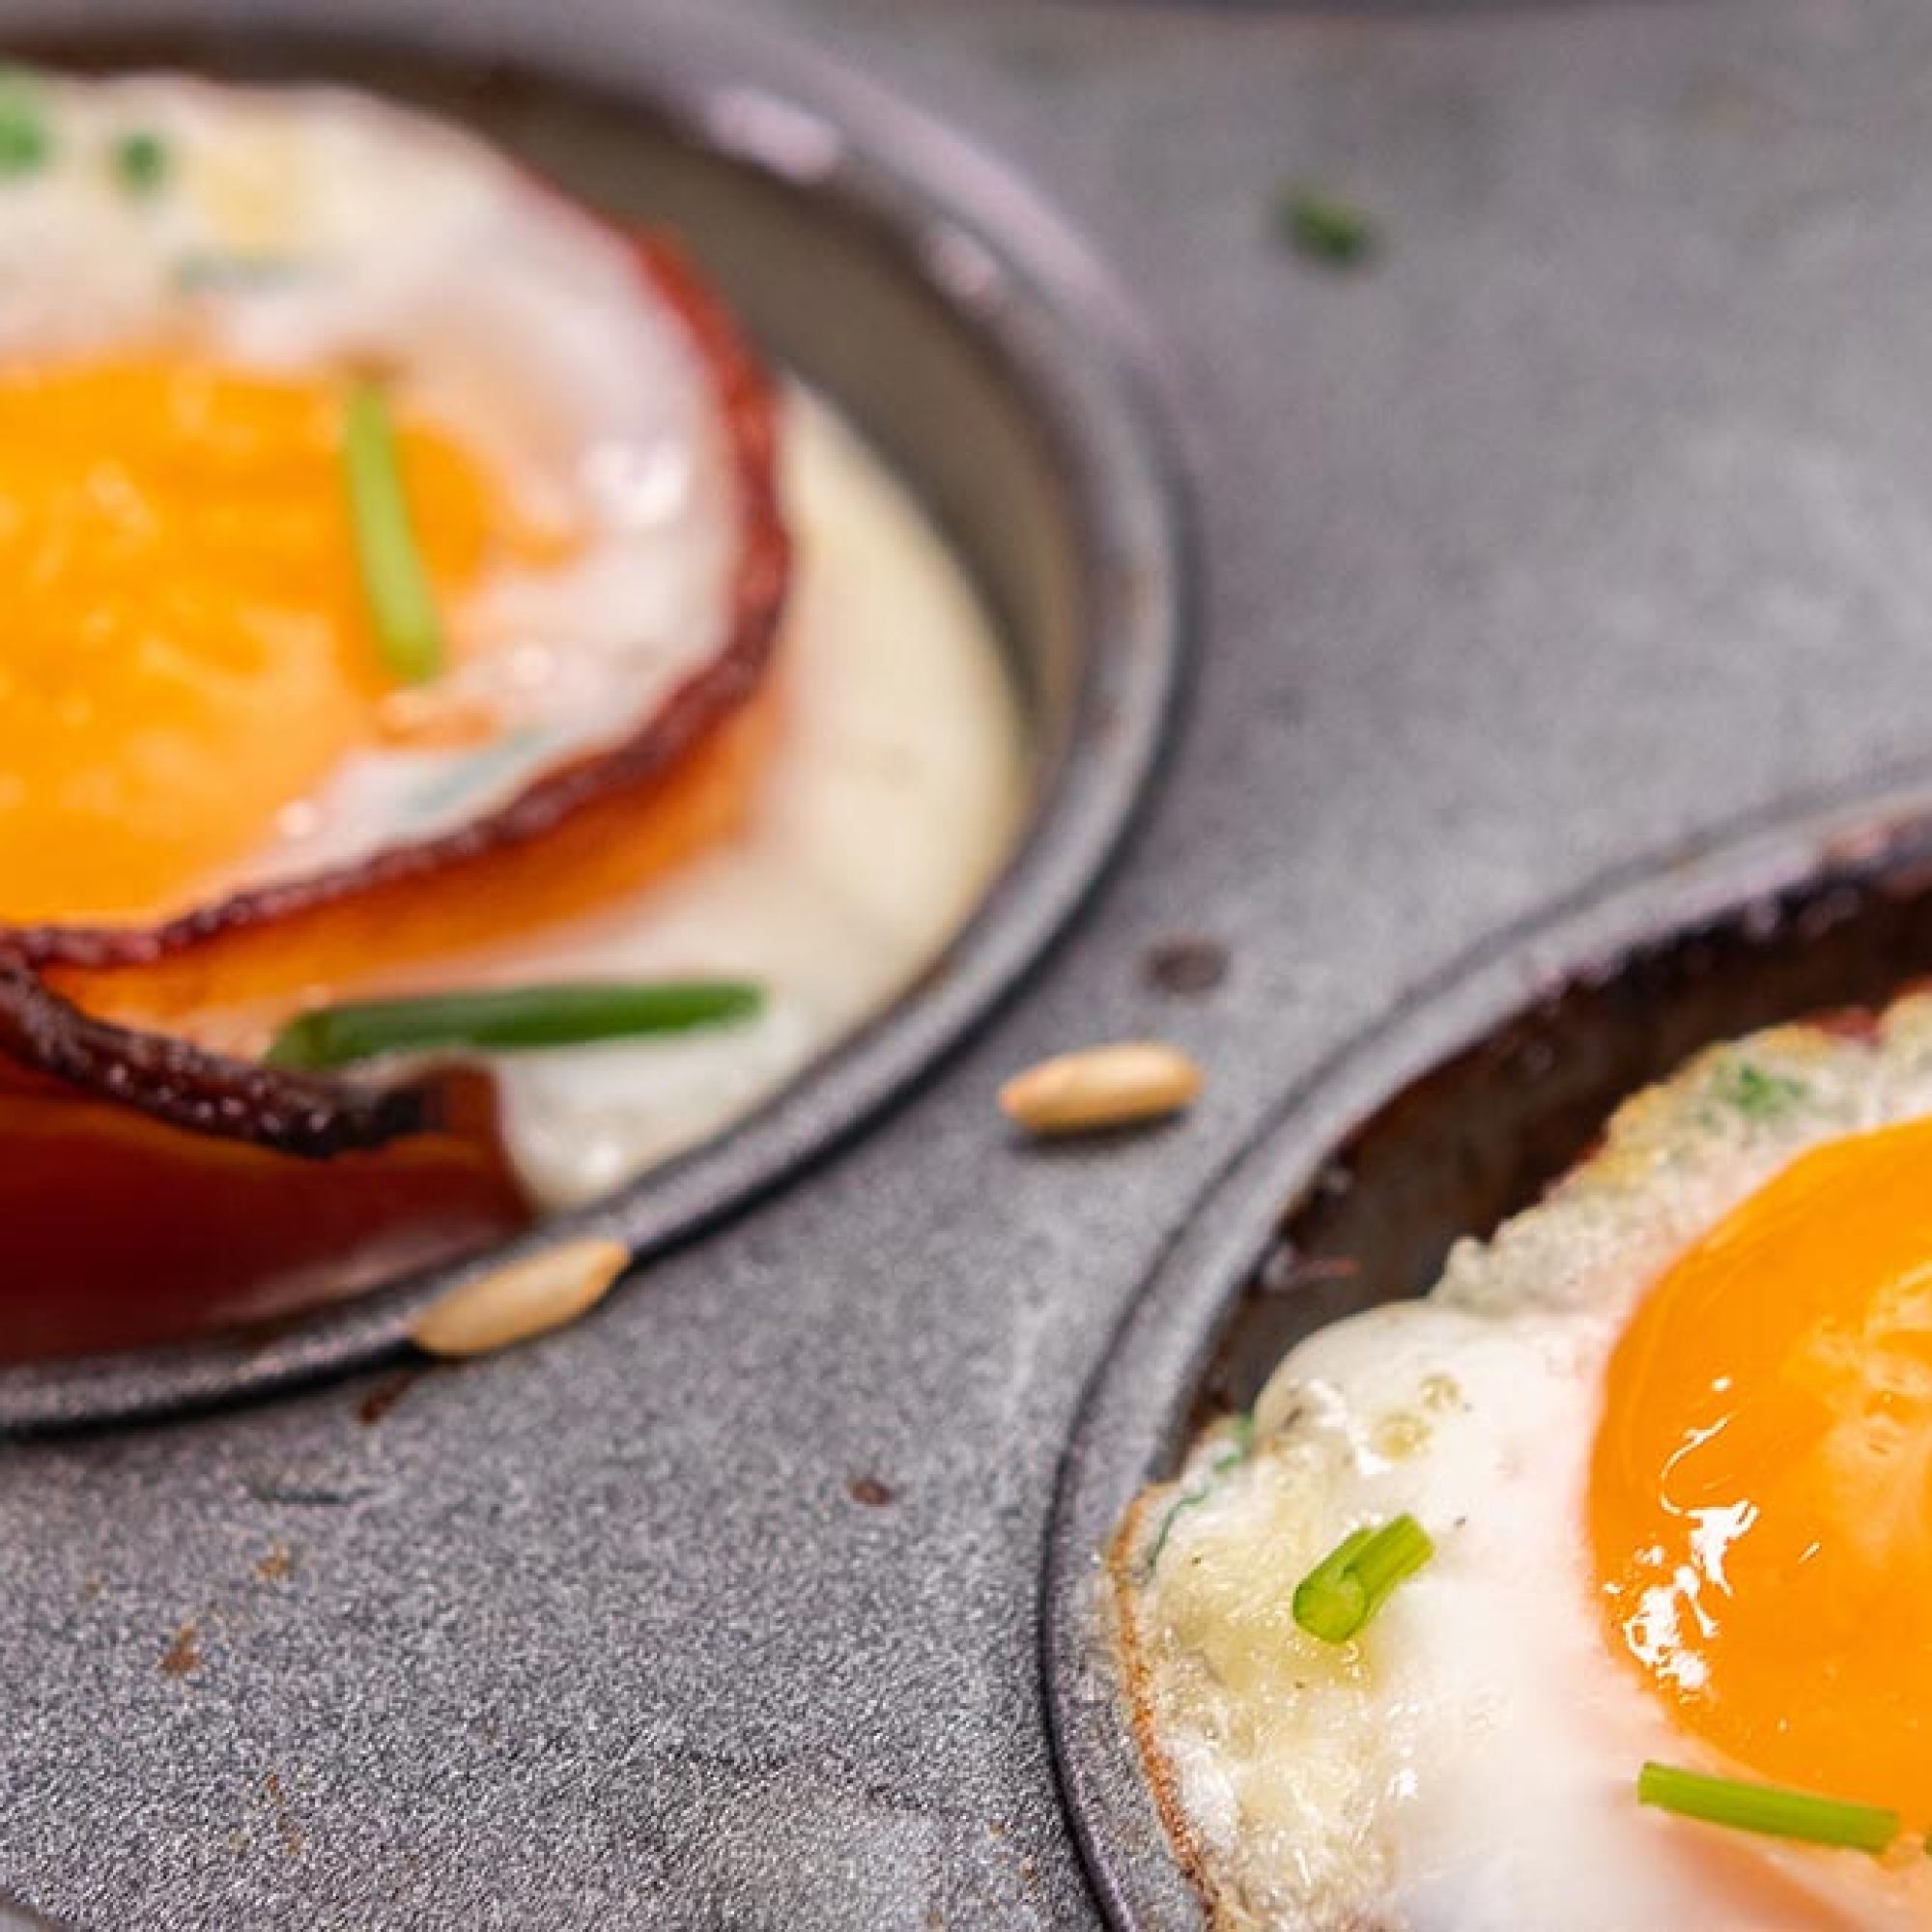 Bacon, Egg, Tomato & Herb Cups